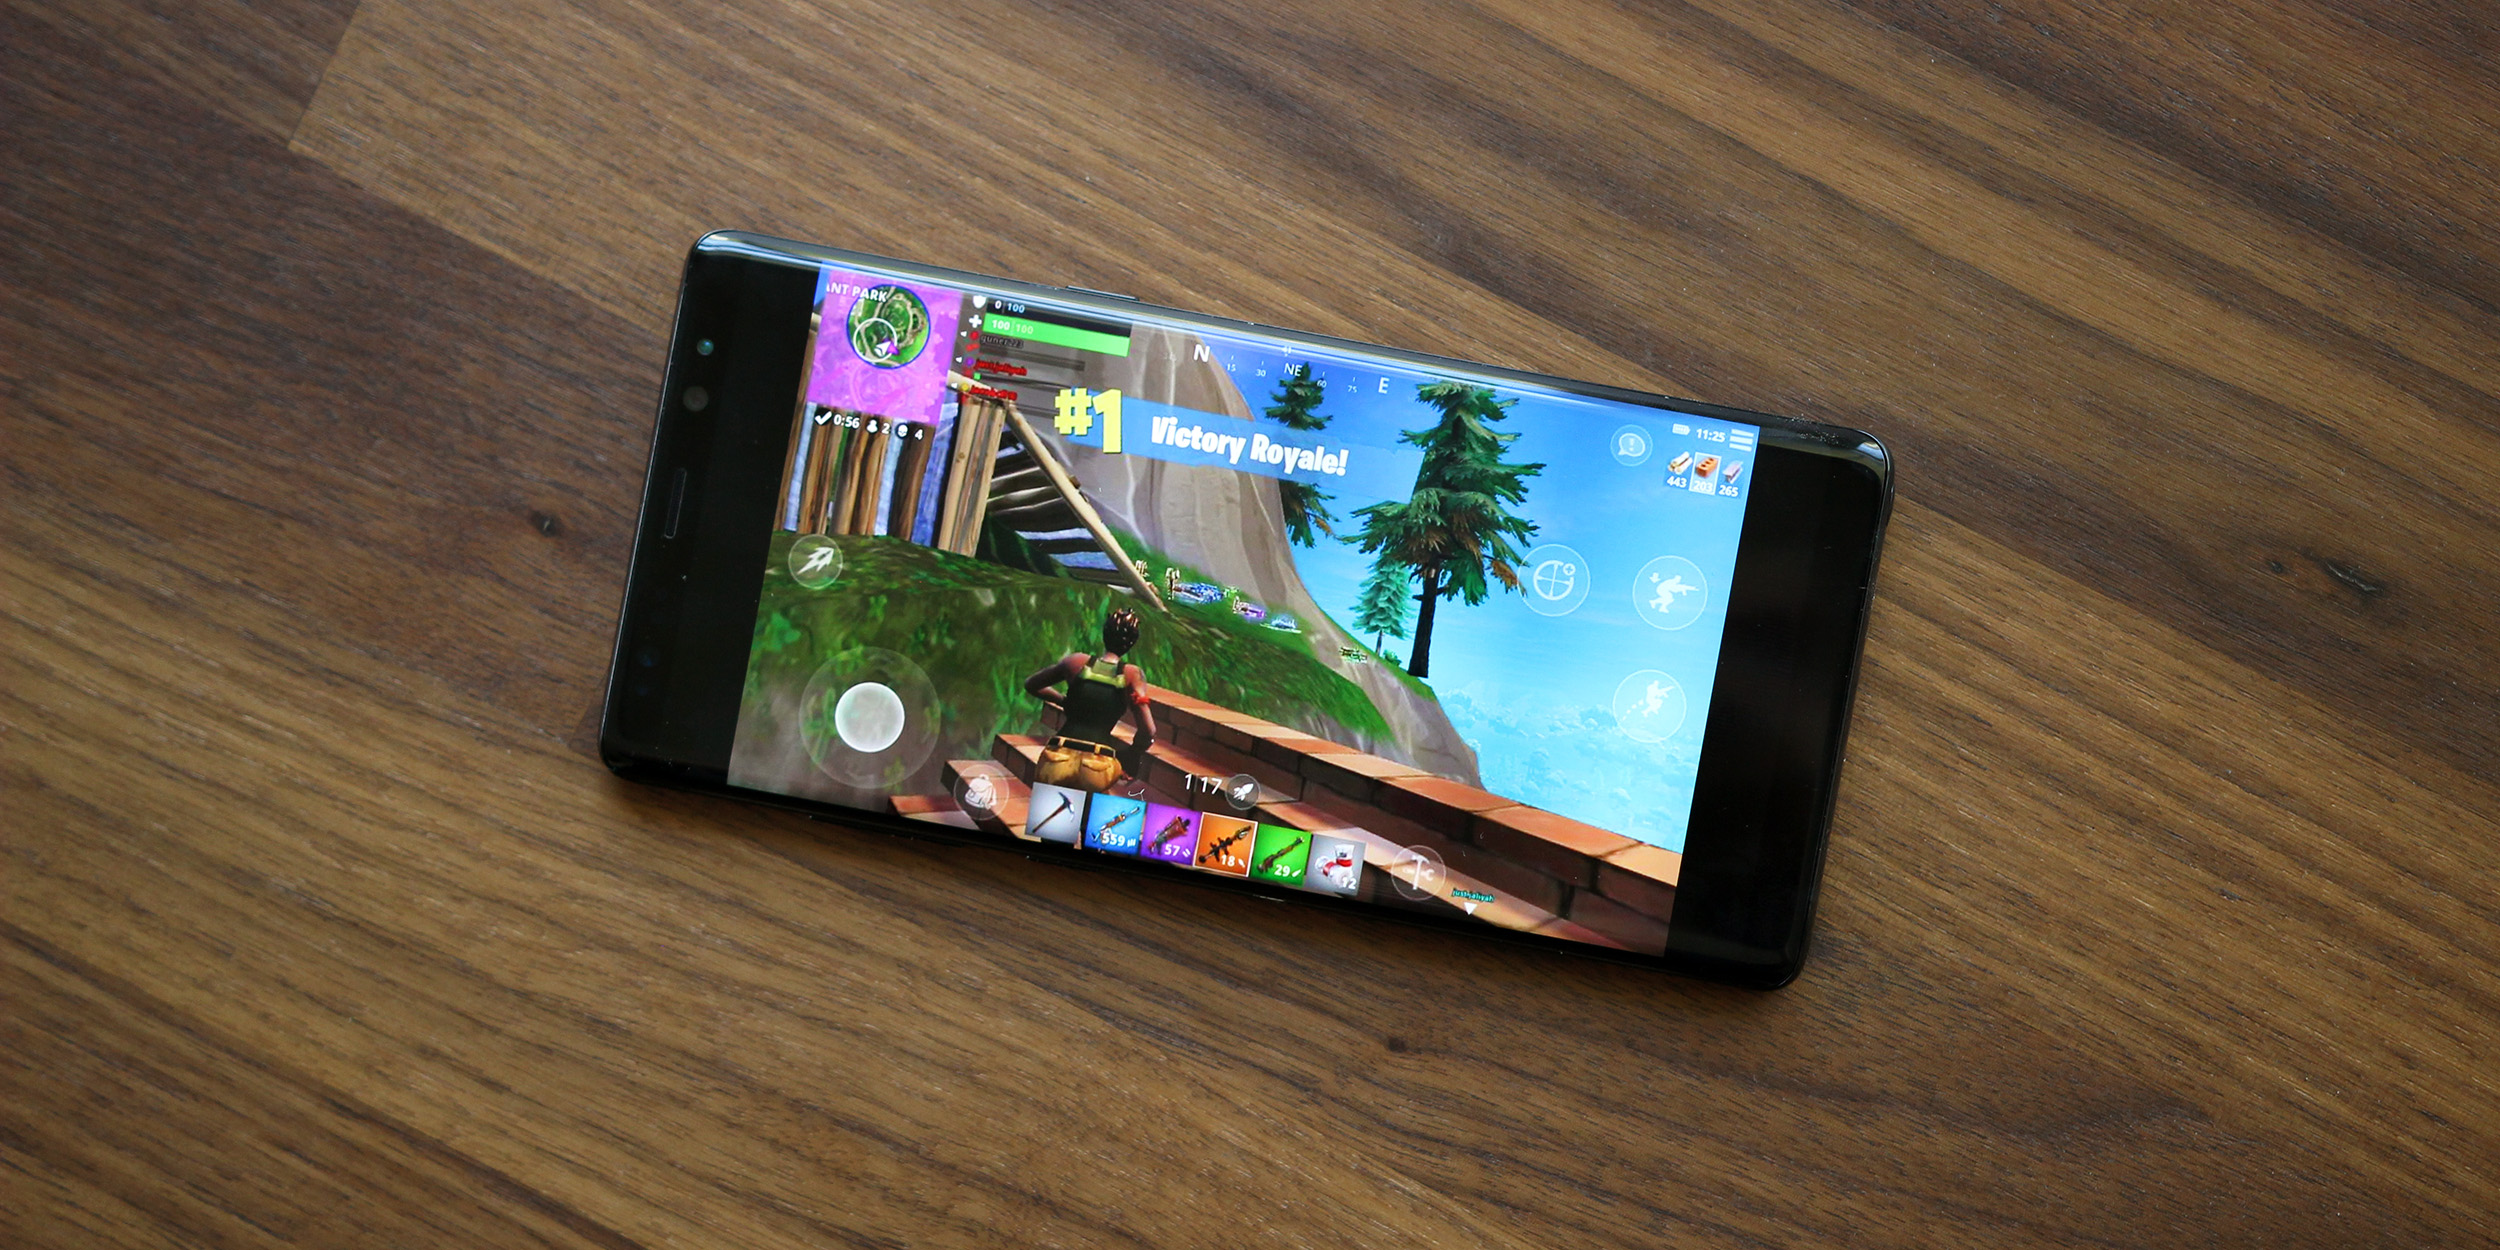 Fortnite Samsung Galaxy Note 4 Fortnite For Android May Be Exclusive To Samsung Devices For Up To 4 Months 9to5google